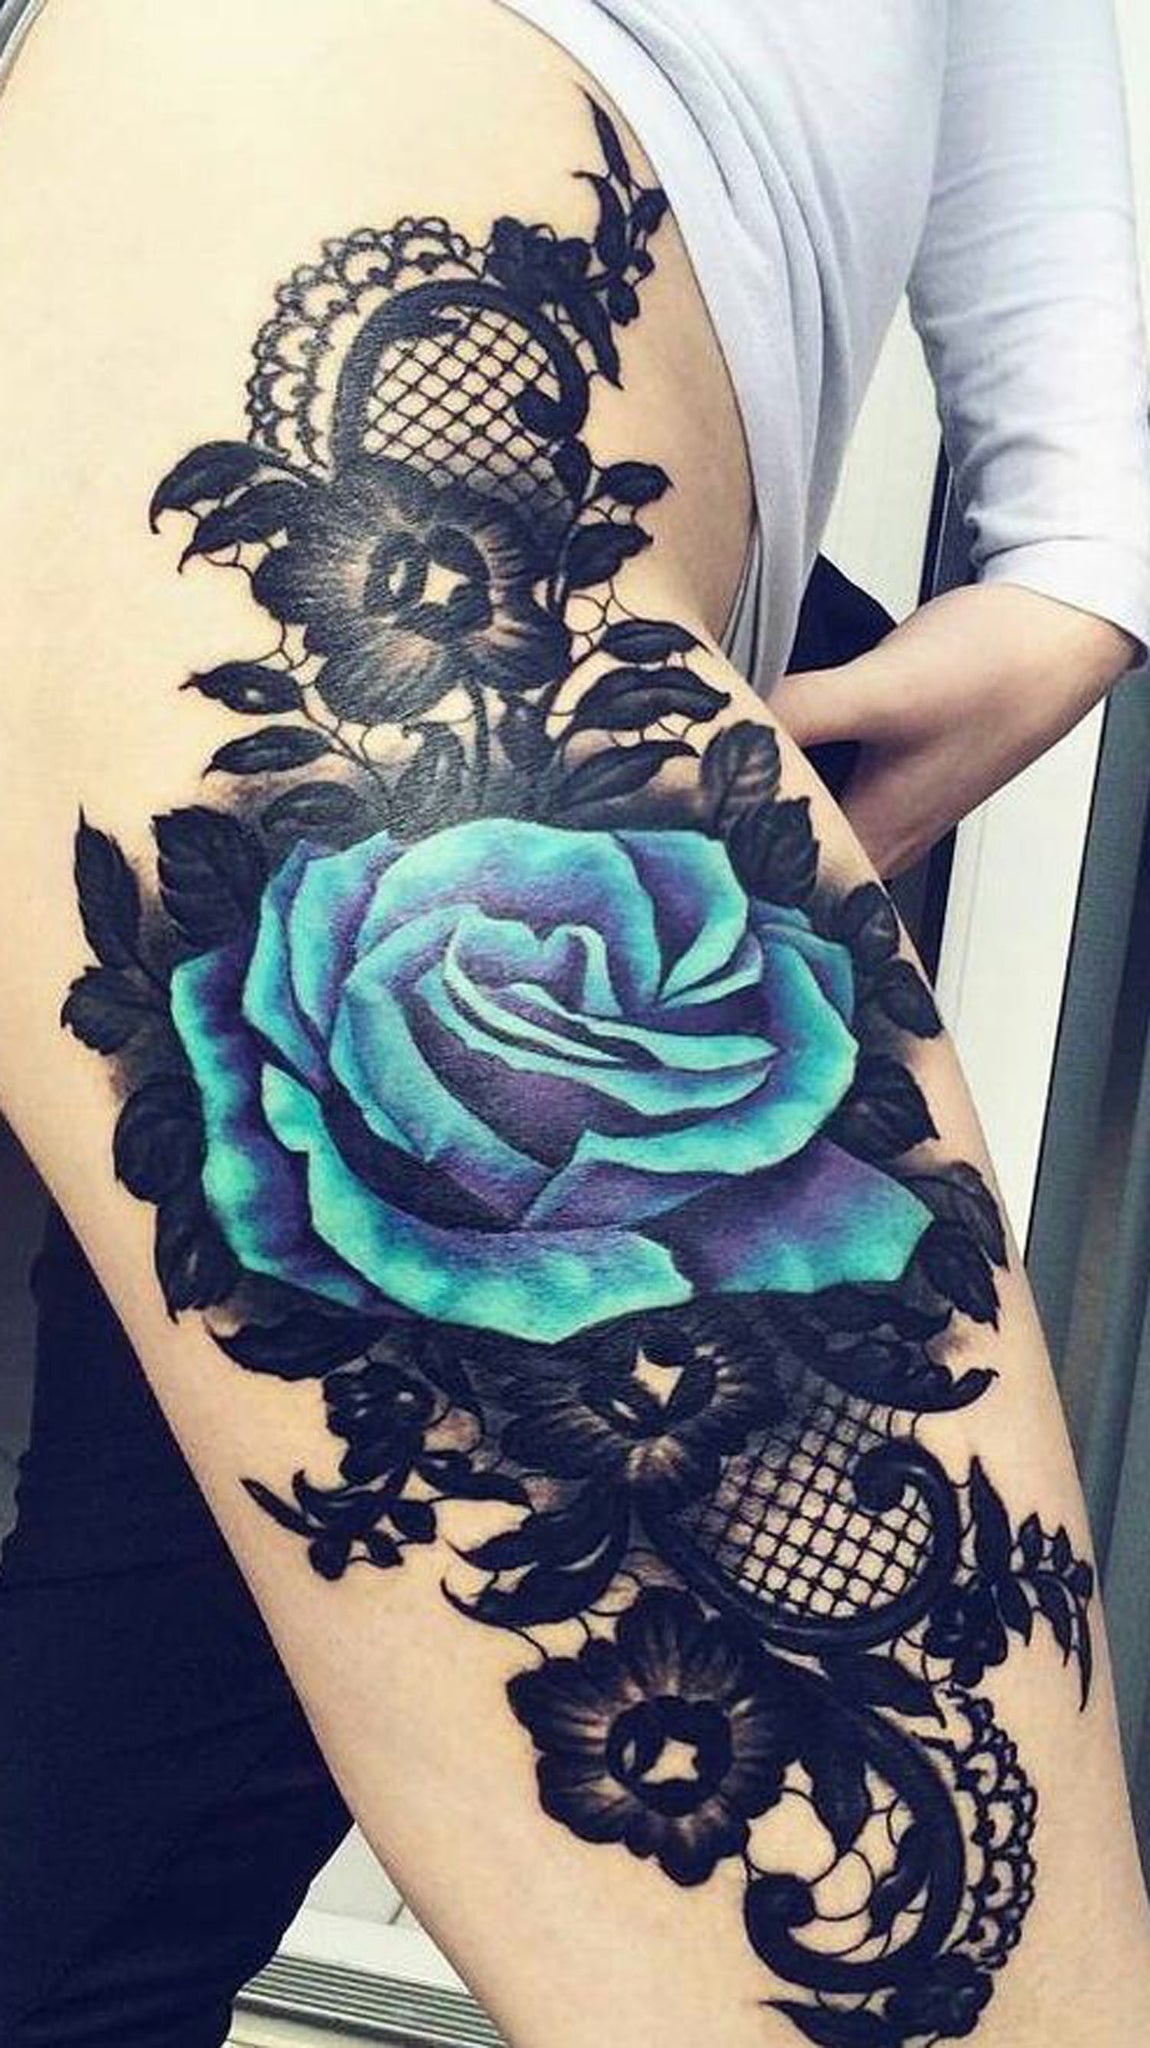 Watercolor Flower Thigh Tattoo Ideas for Women at MyBodiArt.com - Blue Floral Rose Black Lace Tat 